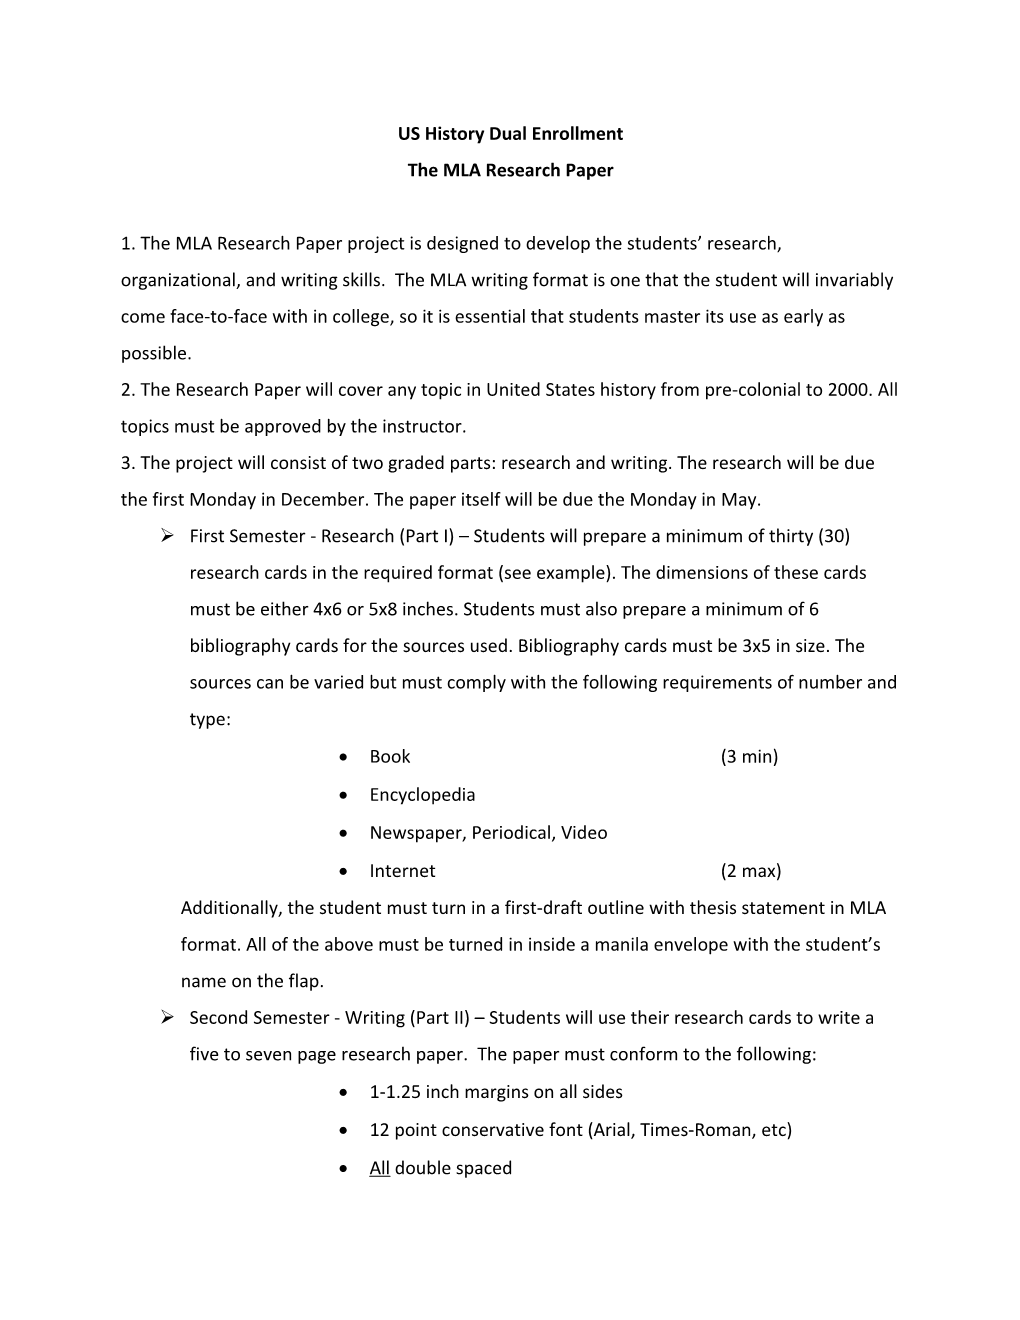 The MLA Research Paper